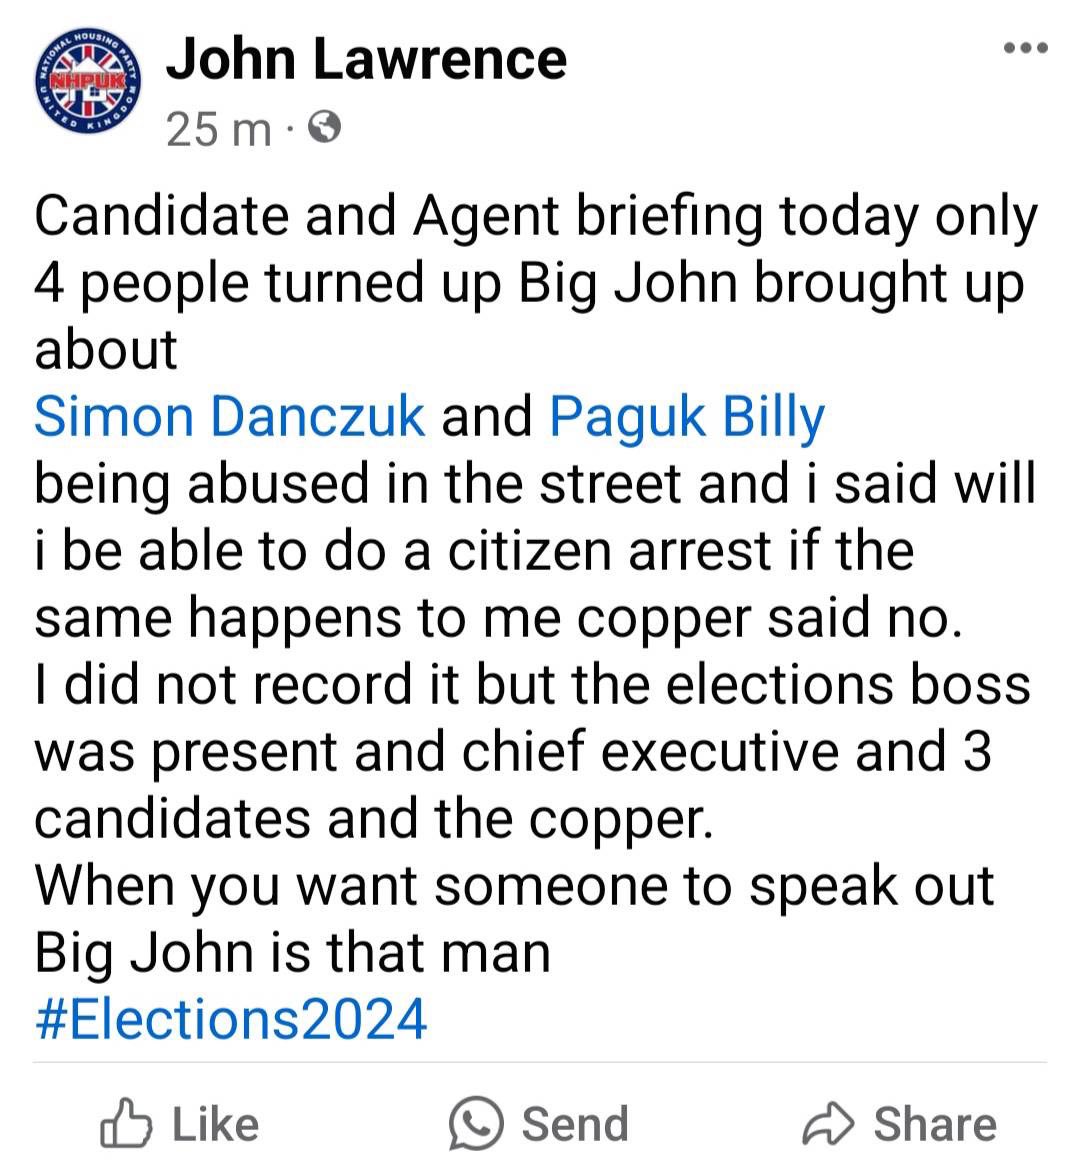 It's all going absolutely swimmingly with this moronic brainstrust. A bloke called Big John wants to make Citizen's arrests